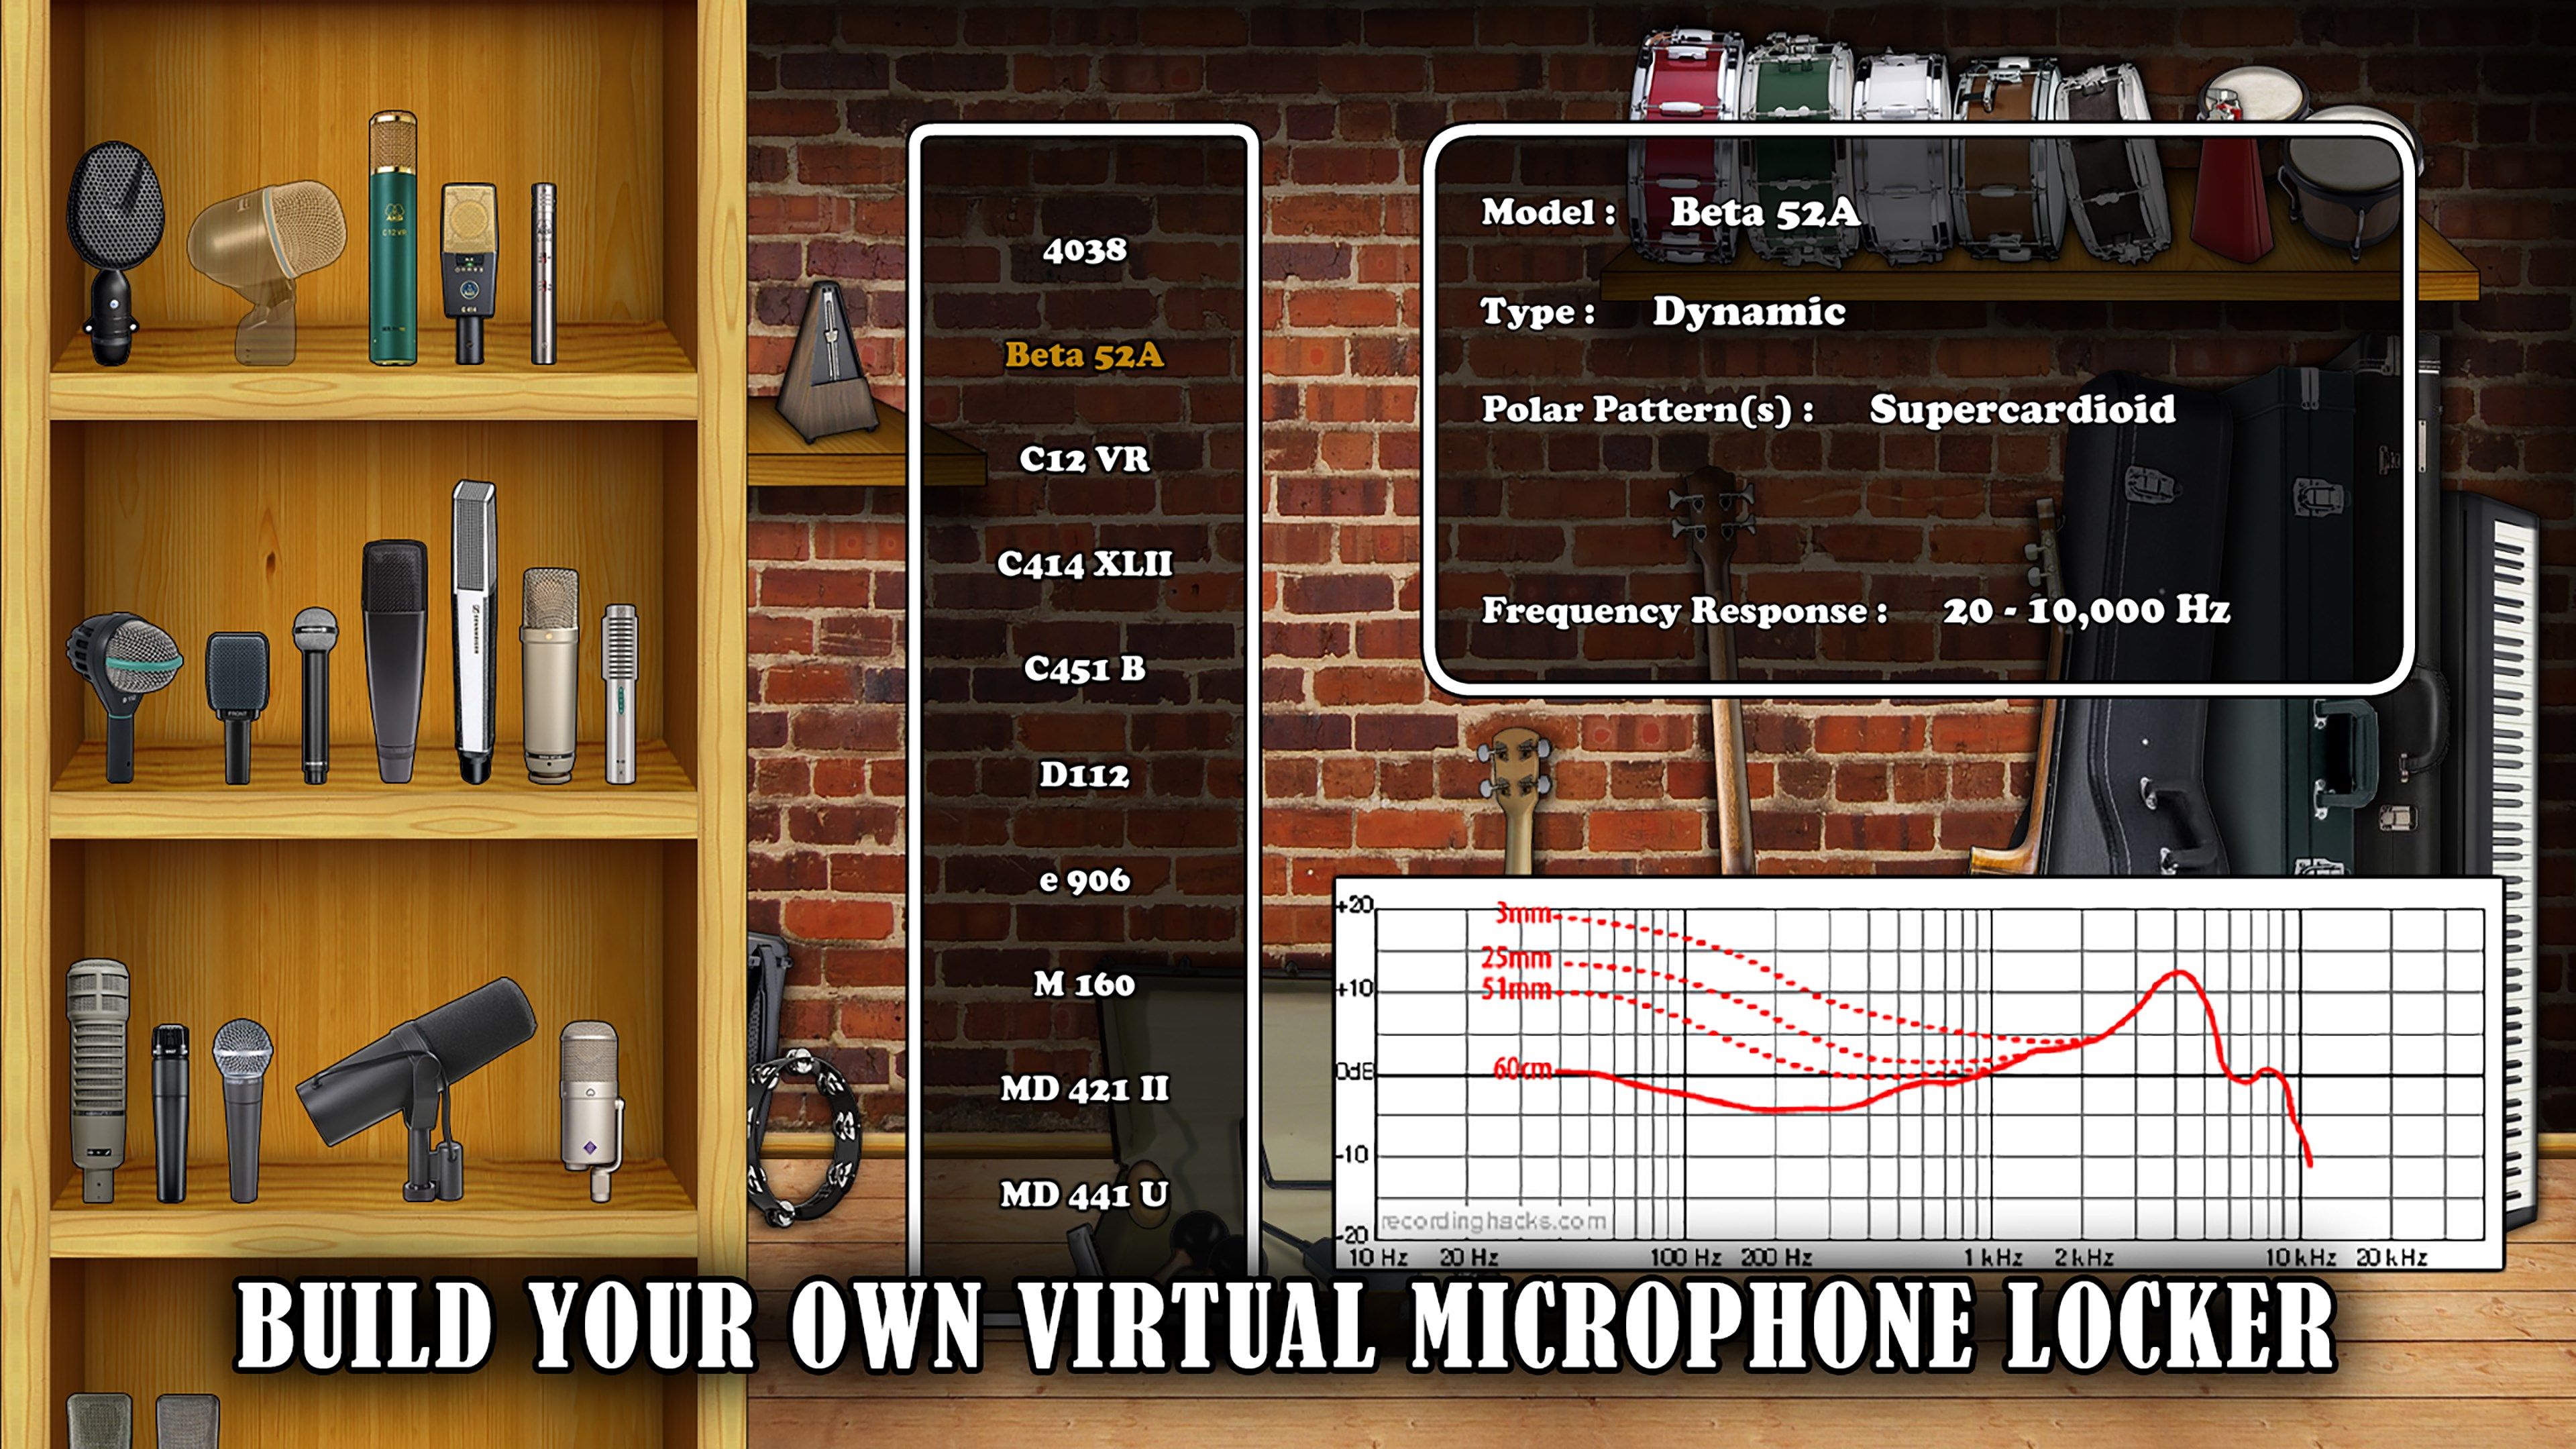 Build your own virtual microphone locker